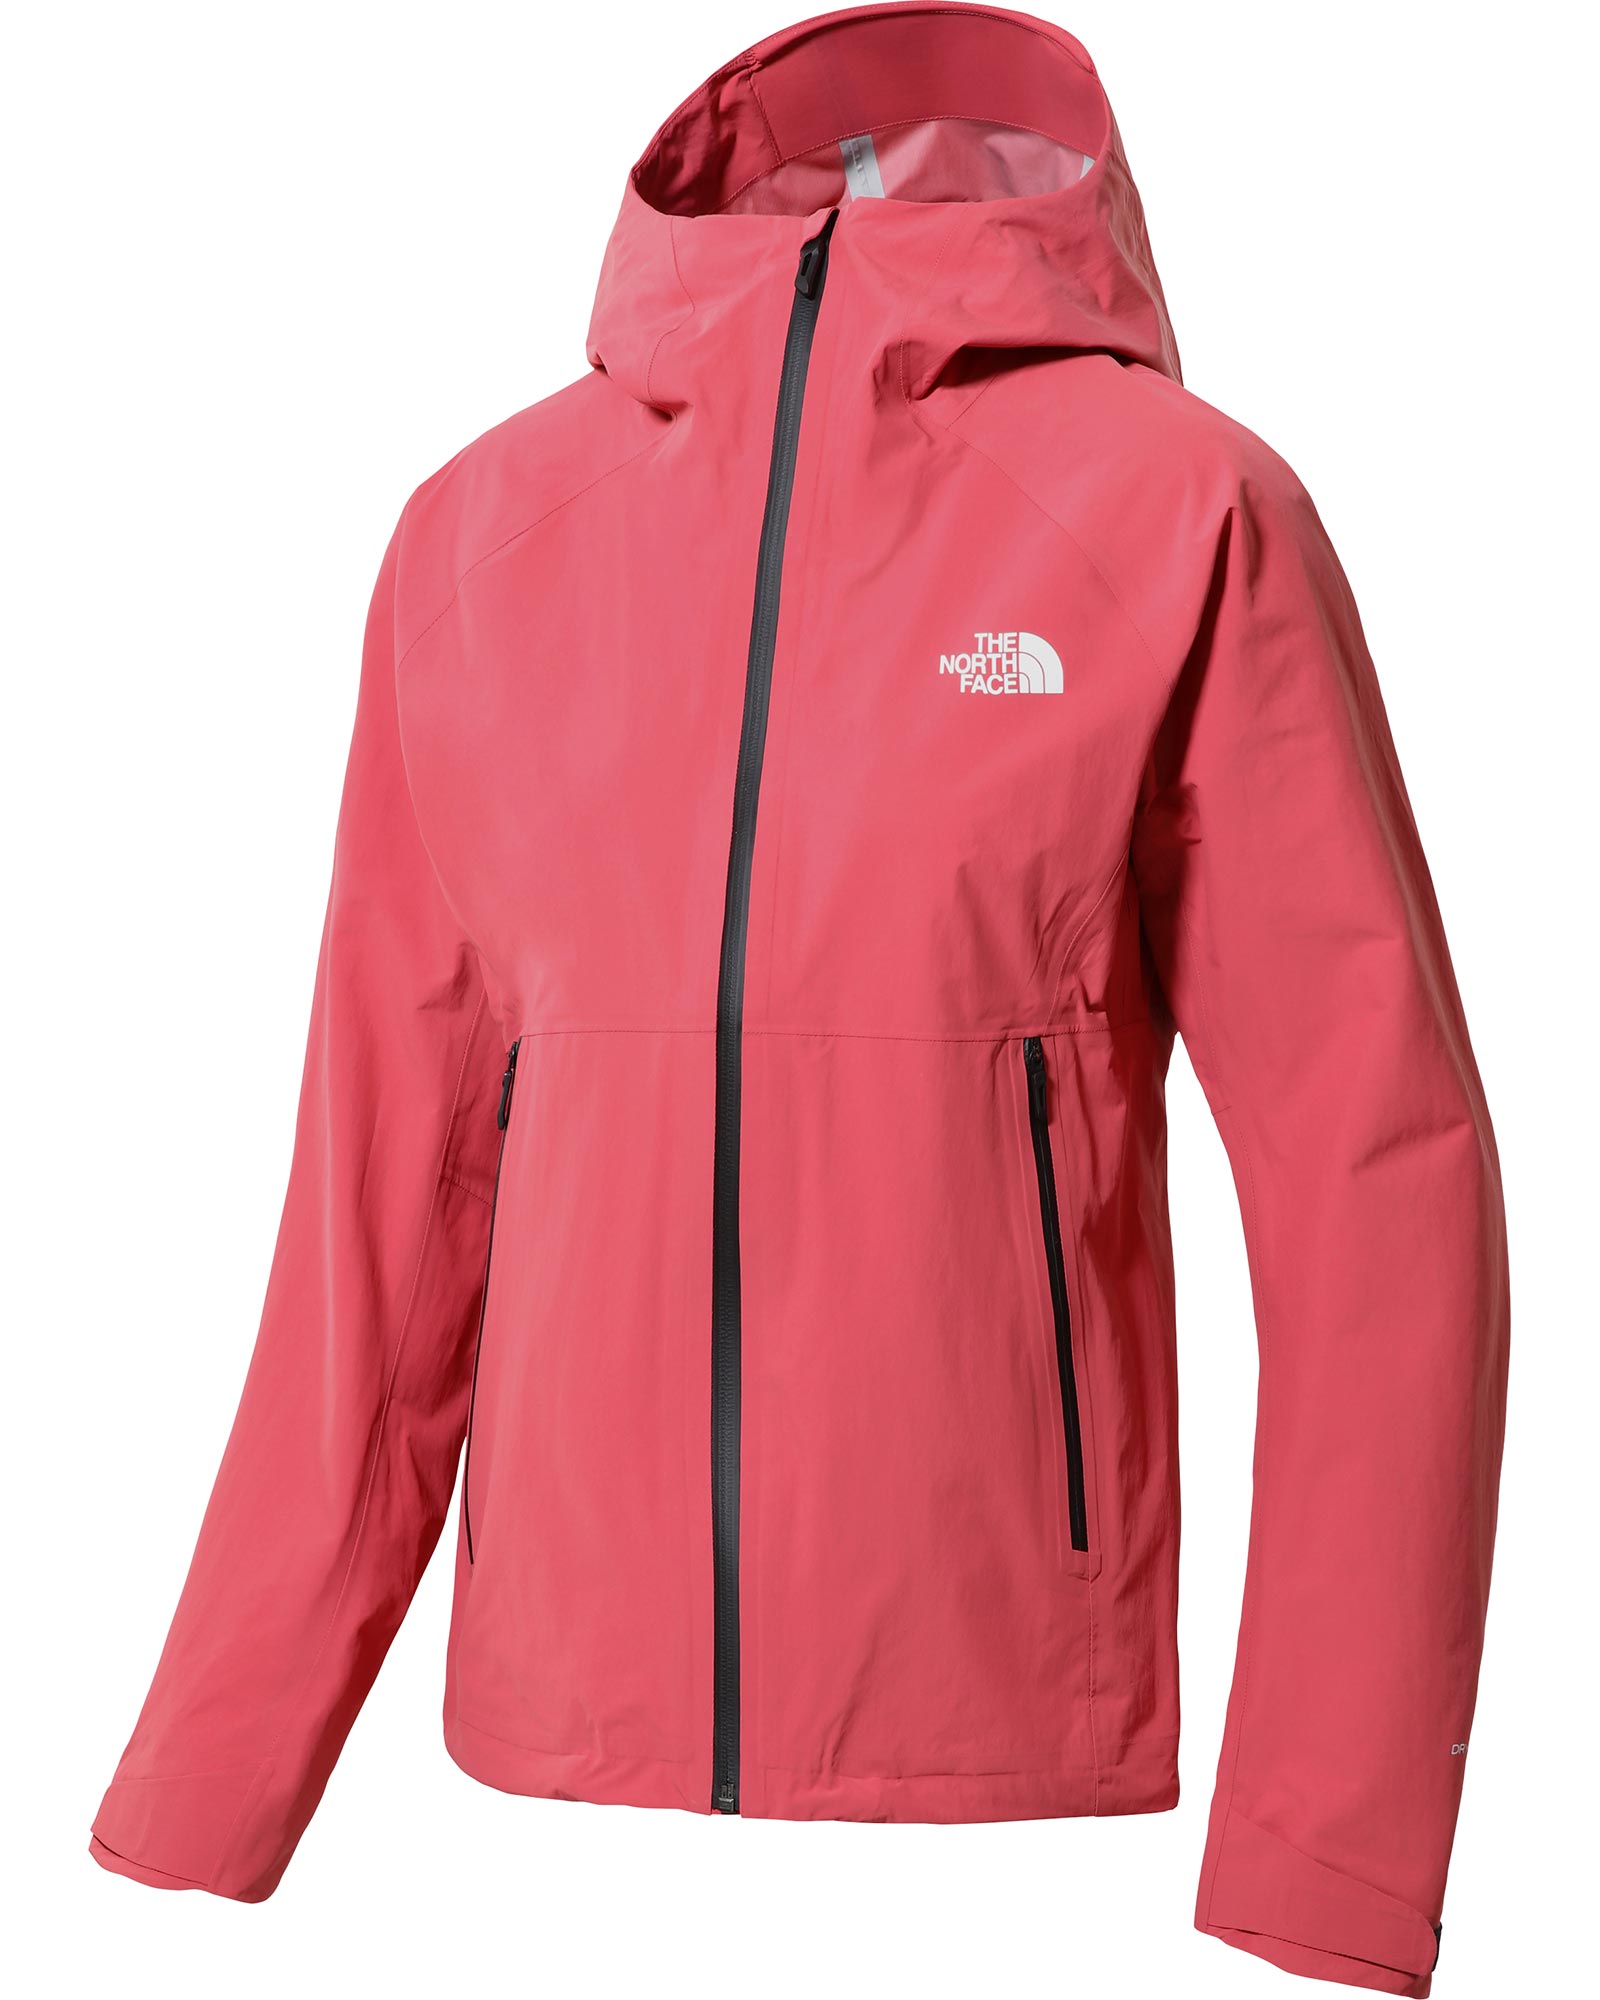 The North Face Circadian 2.5L Women’s Jacket - Slate Rose S